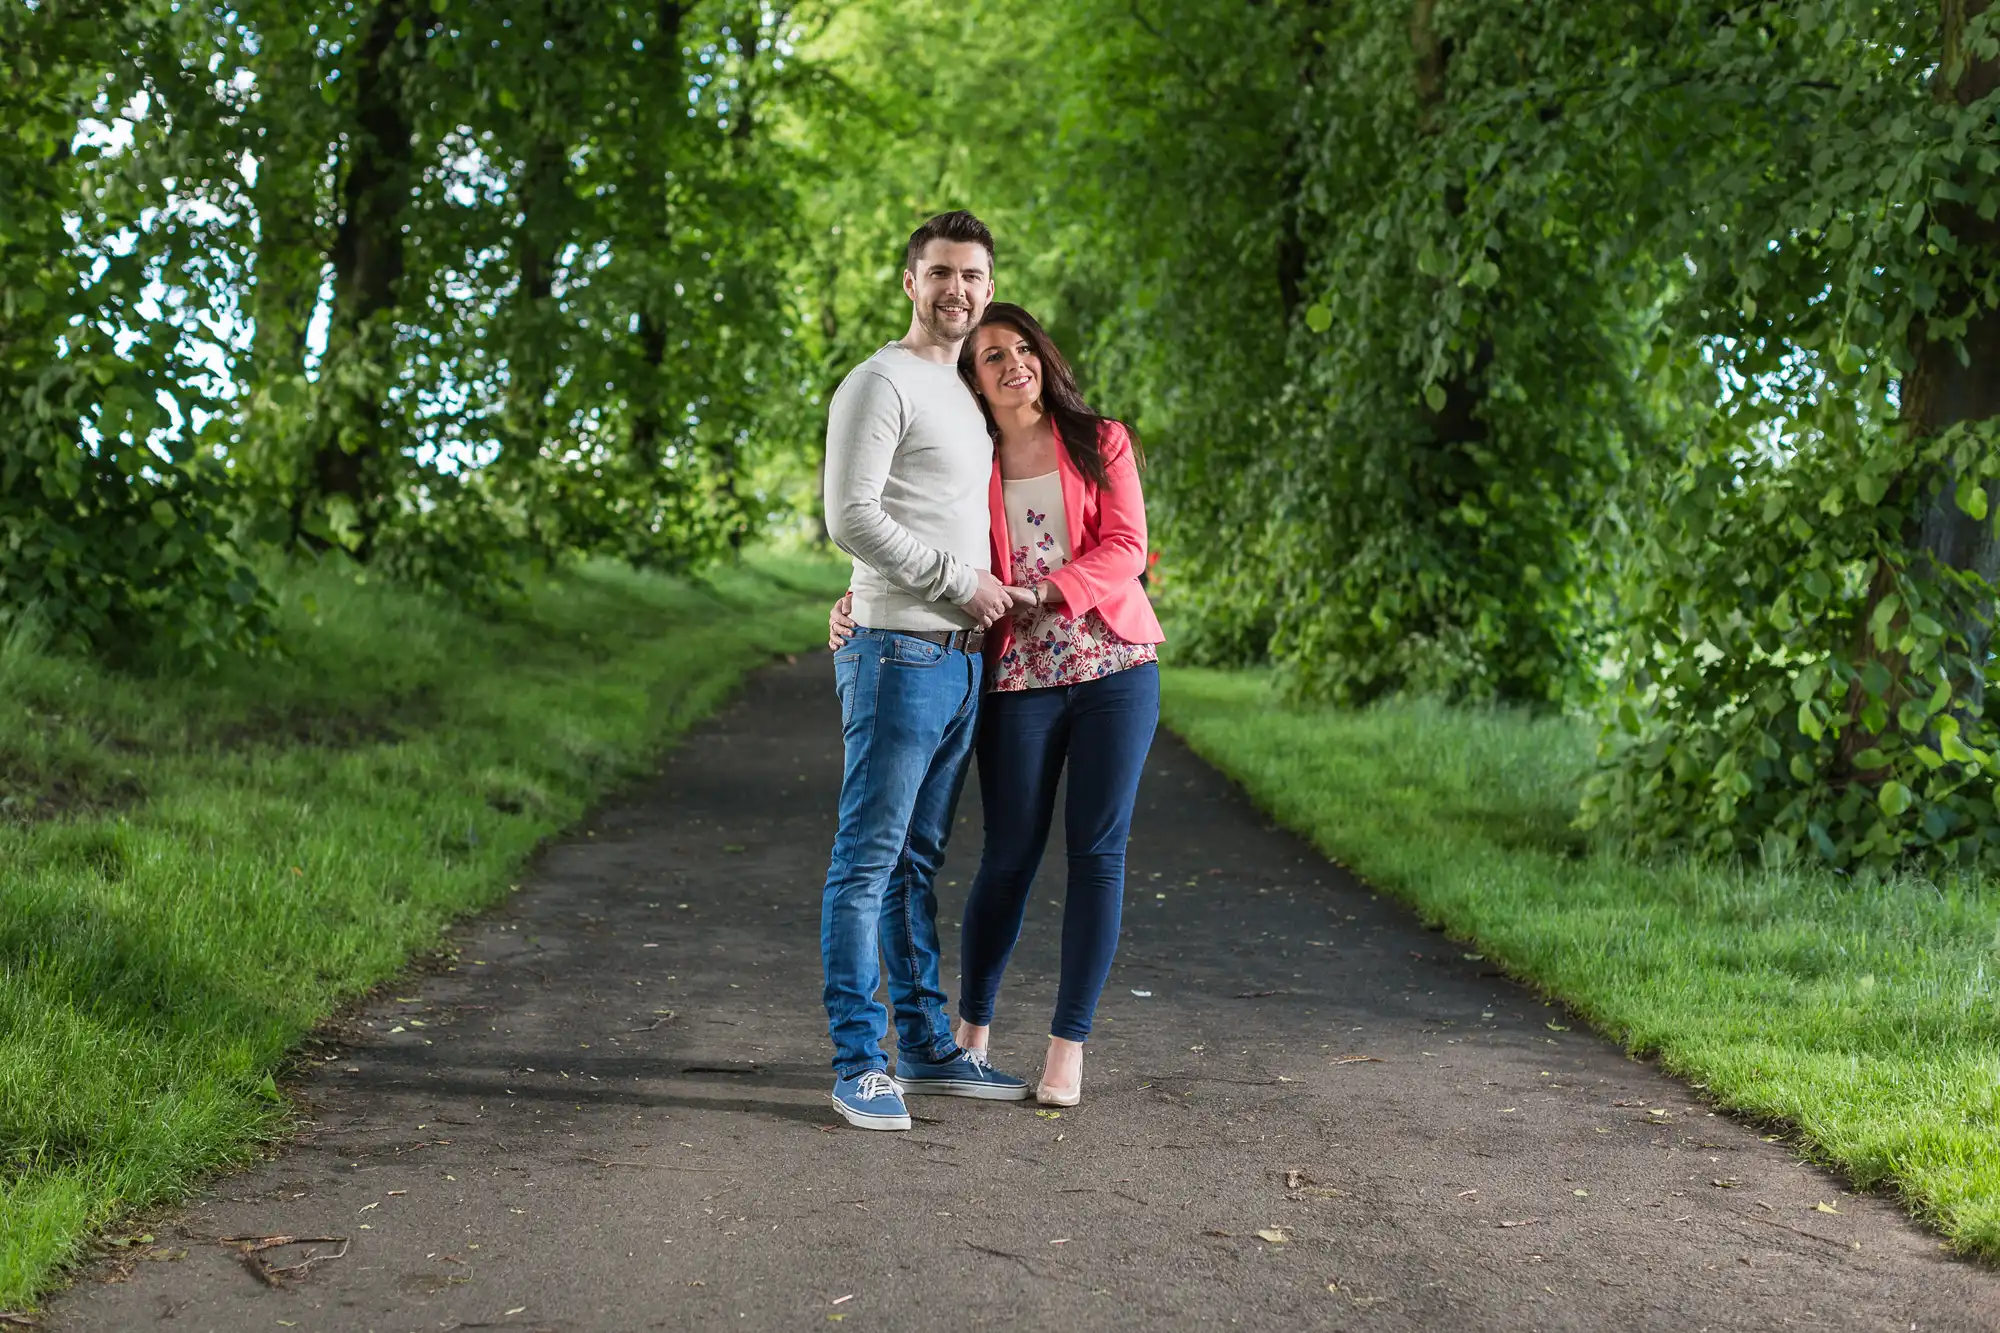 A happy couple embracing while standing on a tree-lined path in a park.